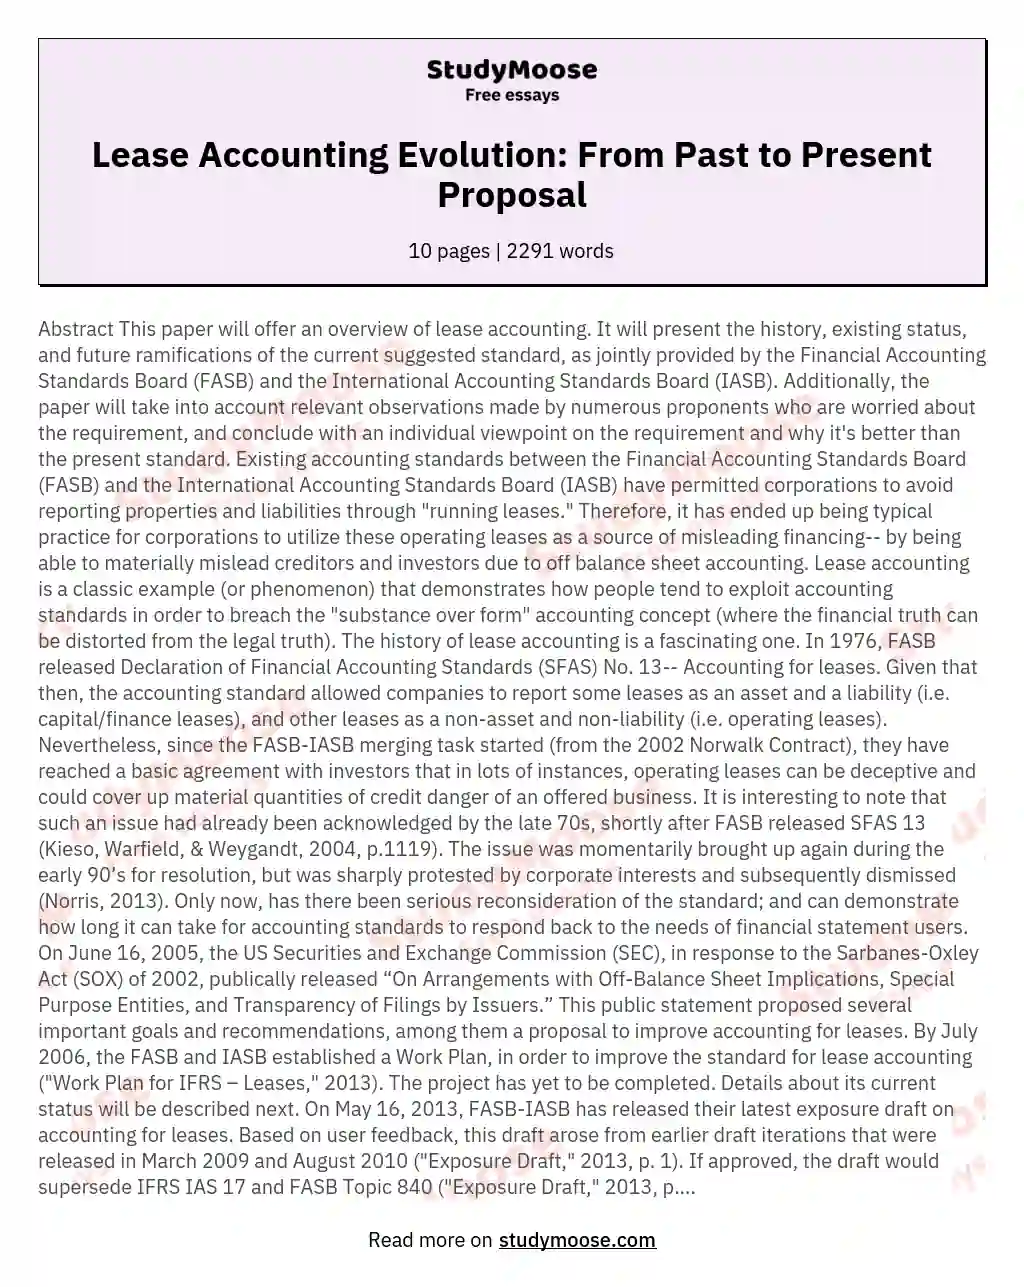 Lease Accounting Evolution: From Past to Present Proposal essay